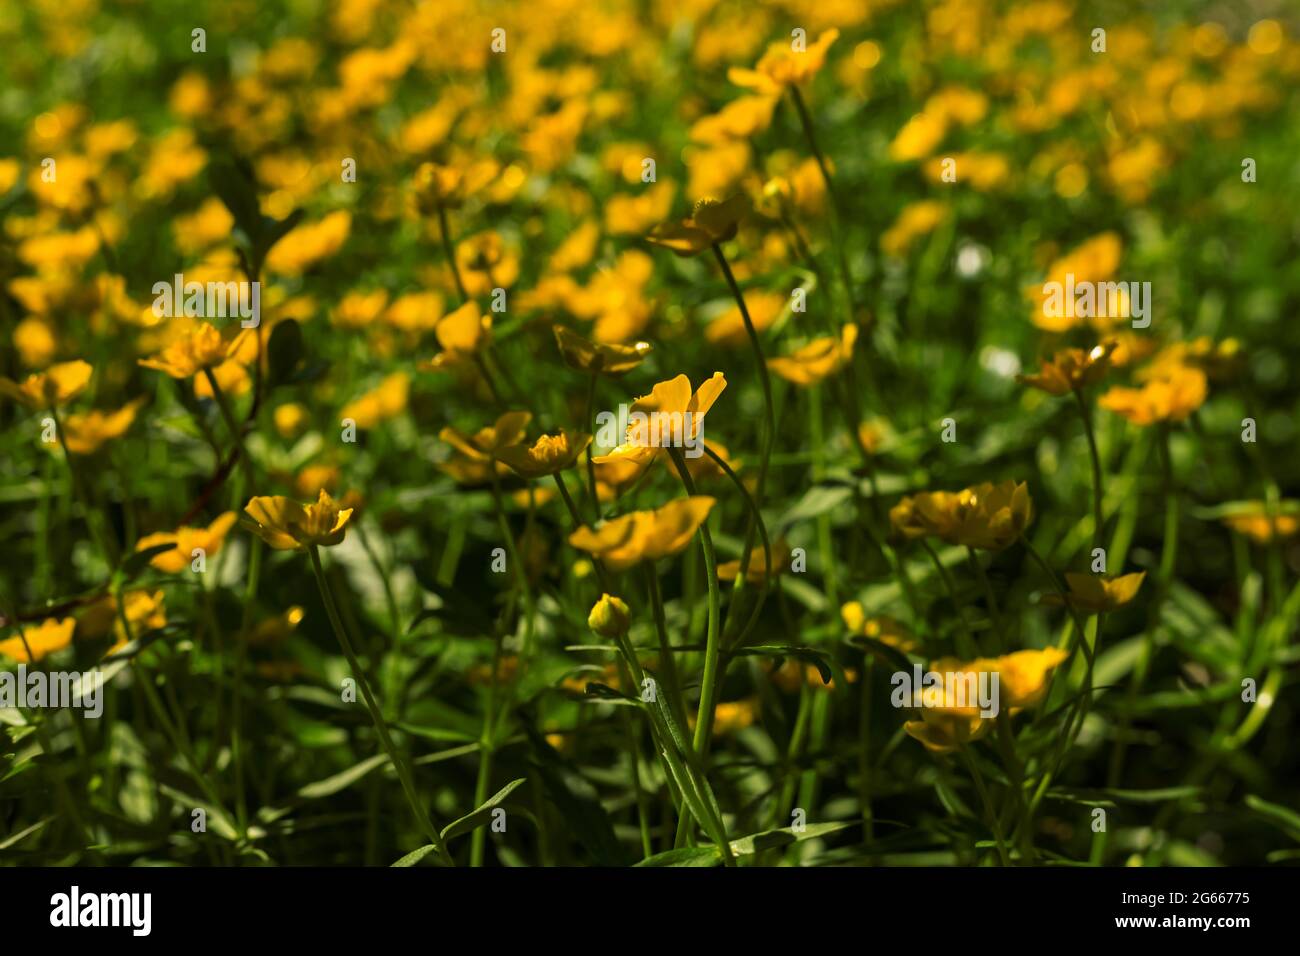 Small yellow wild flowers Ranunculus crowfoot buttercup on natural green grass blurred background. Stock Photo